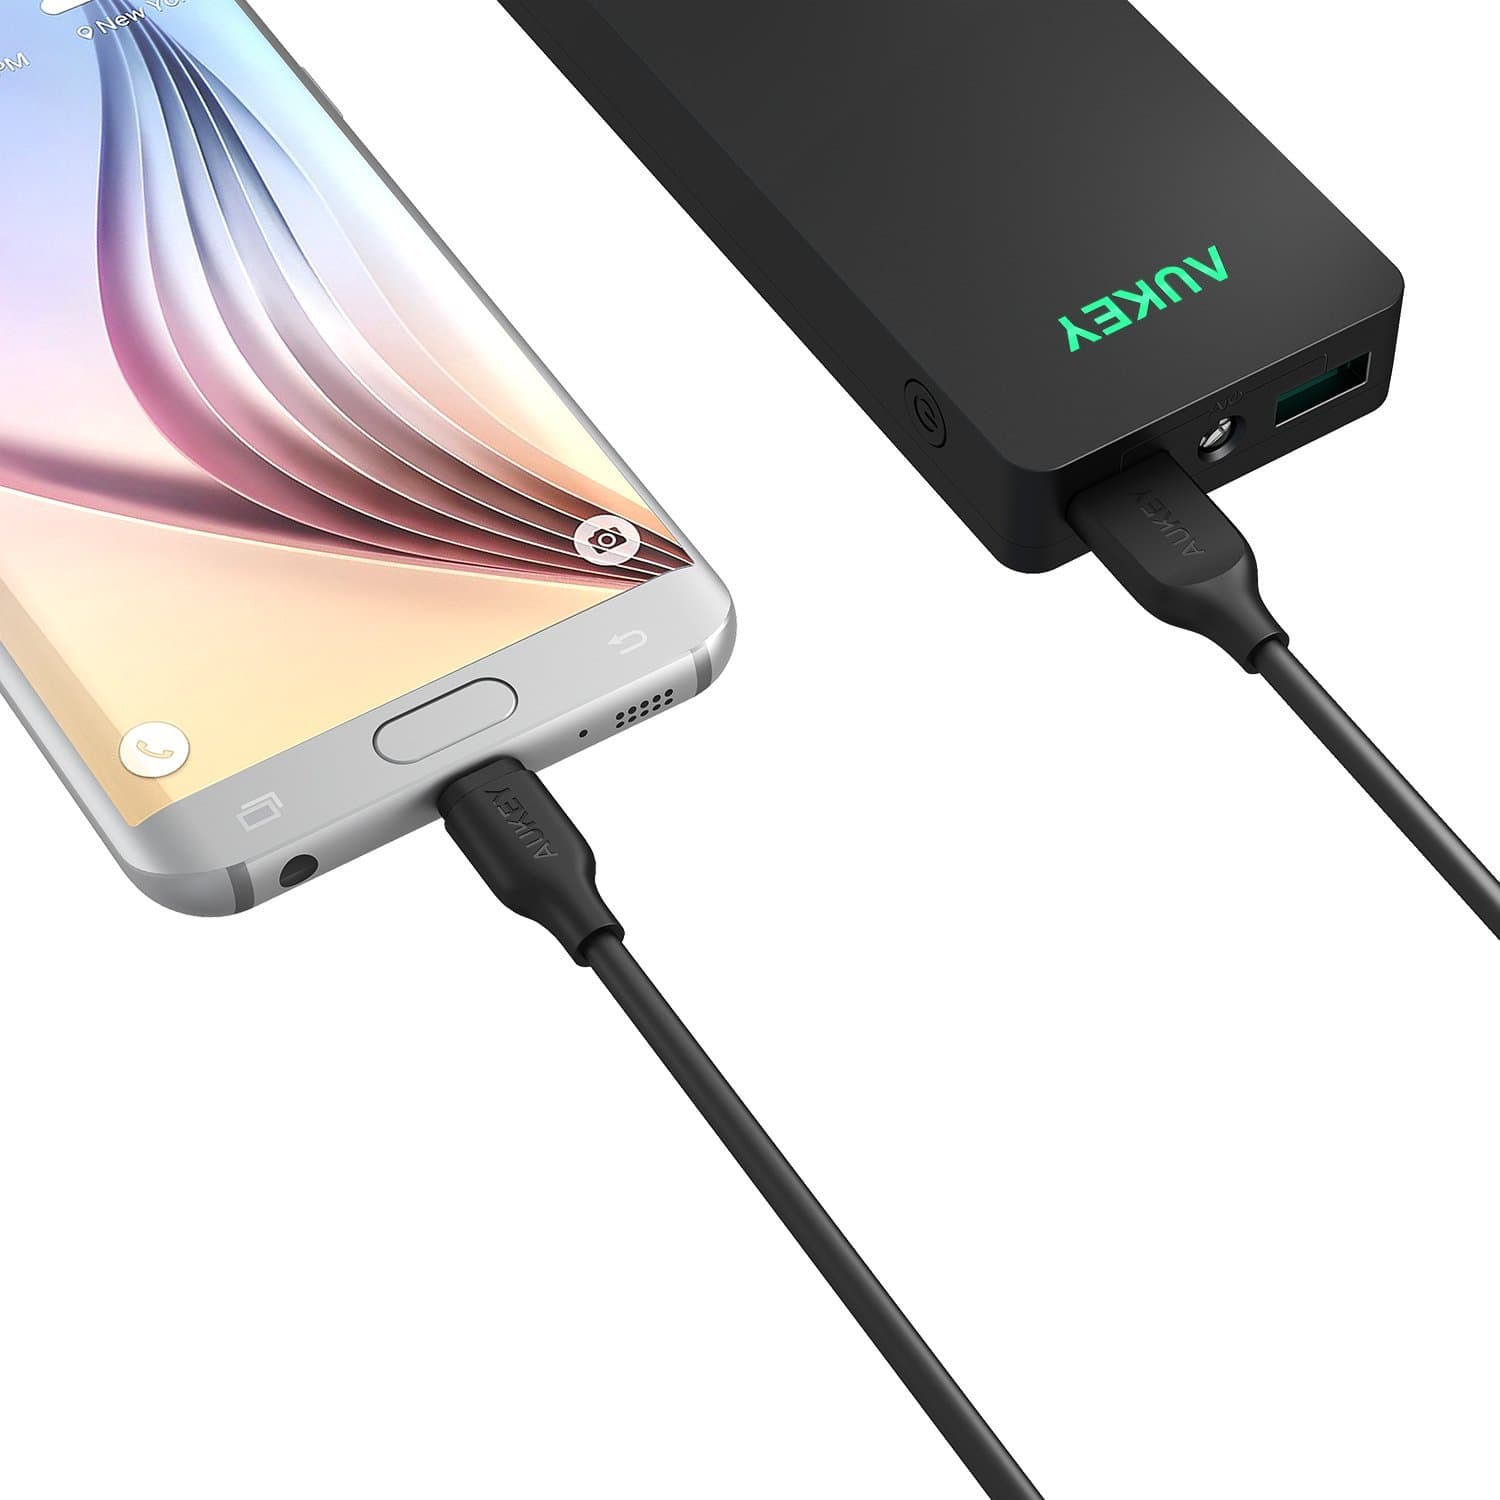 AUKEY CB-MD2 Gold-plated reinforced Qualcomm Quick Charge 2.0/3.0 Micro USB Cable (2M) - Aukey Malaysia Official Store